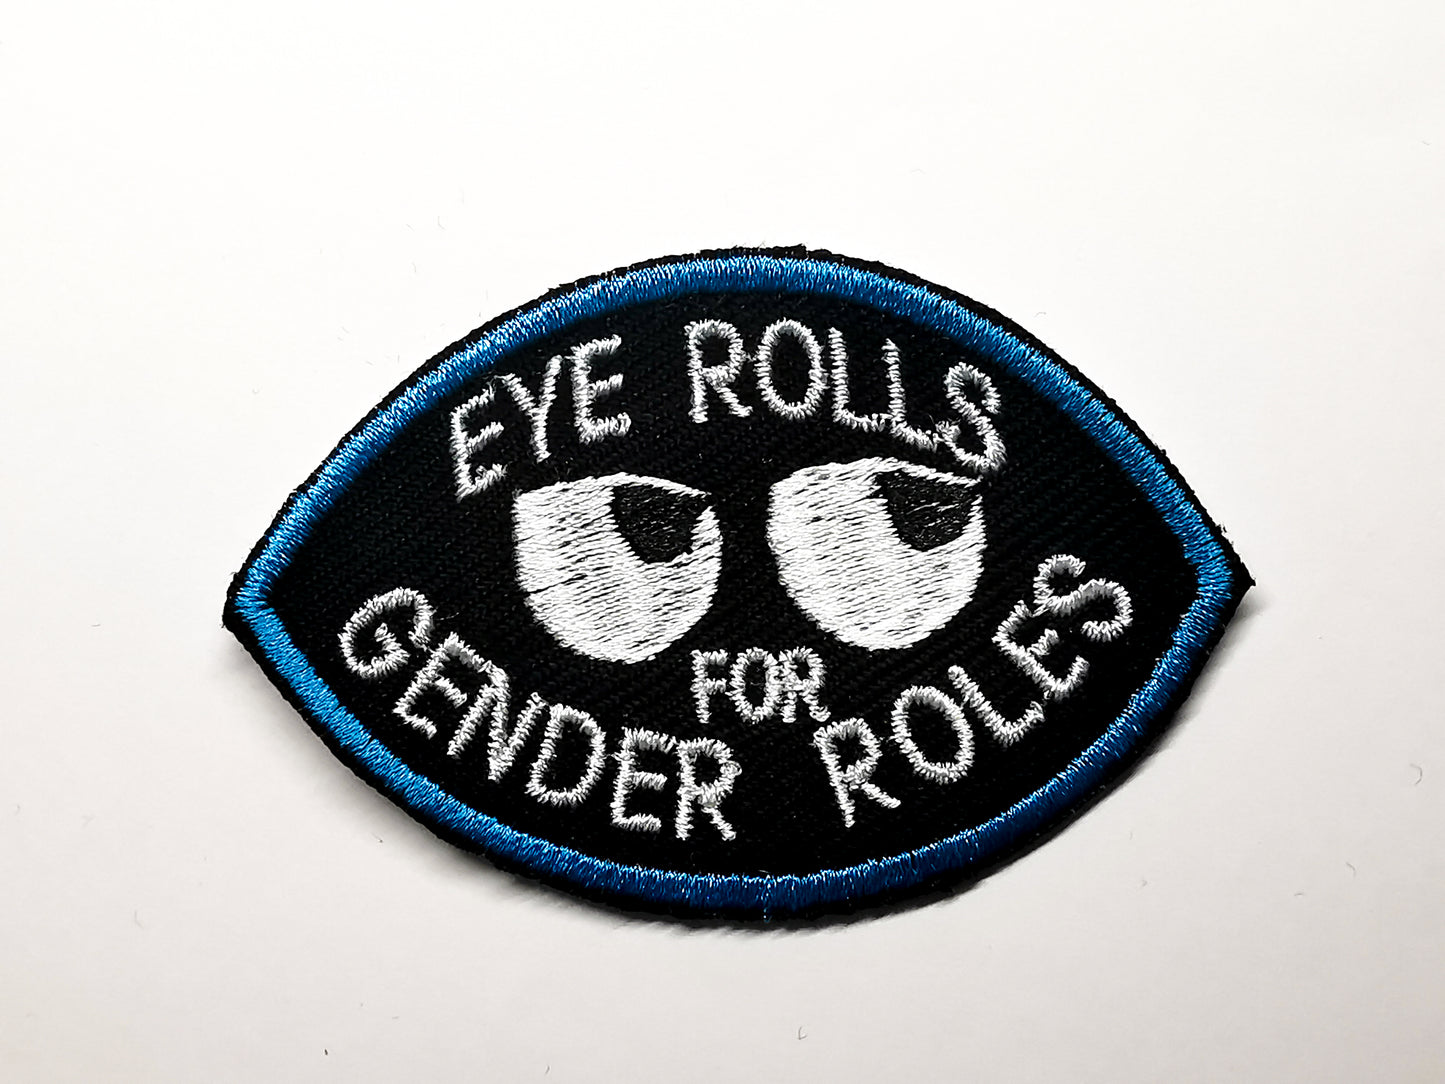 Eye Rolls for Gender Roles Embroidered Patch Eye Shape